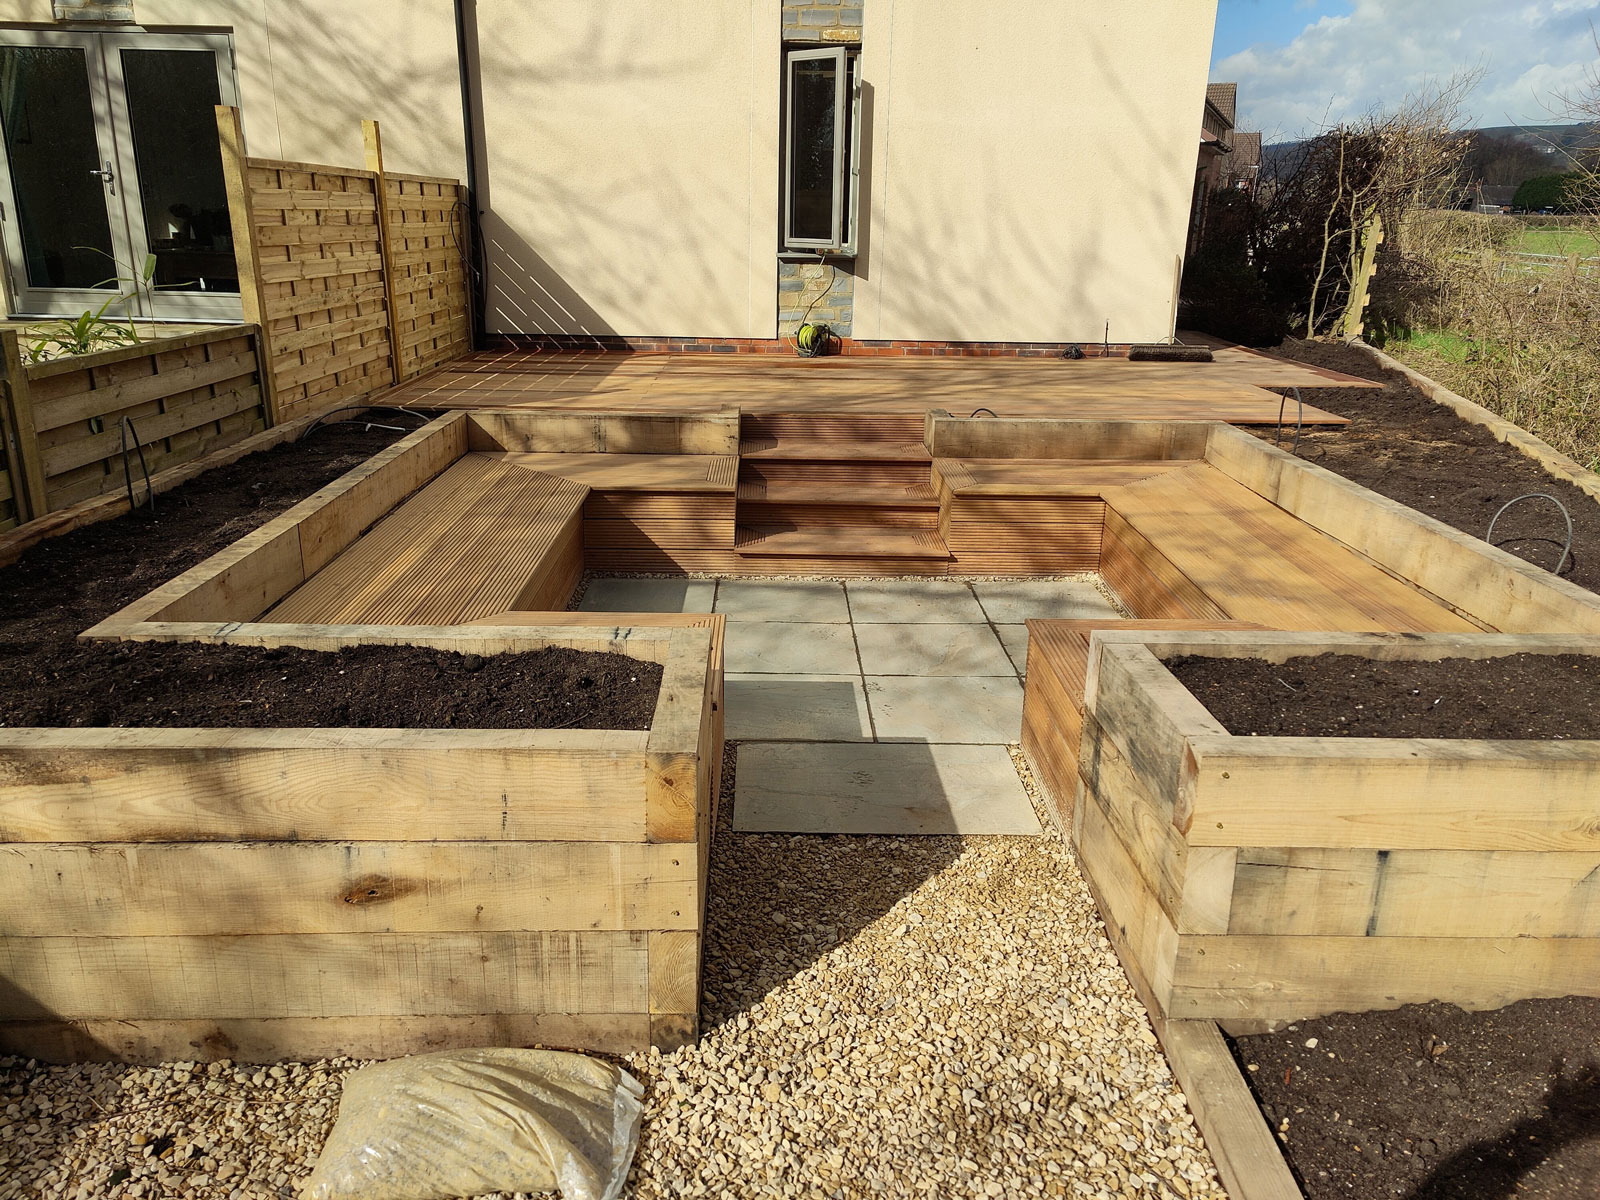 raised beds made with wooden sleepers surrounding a small patio